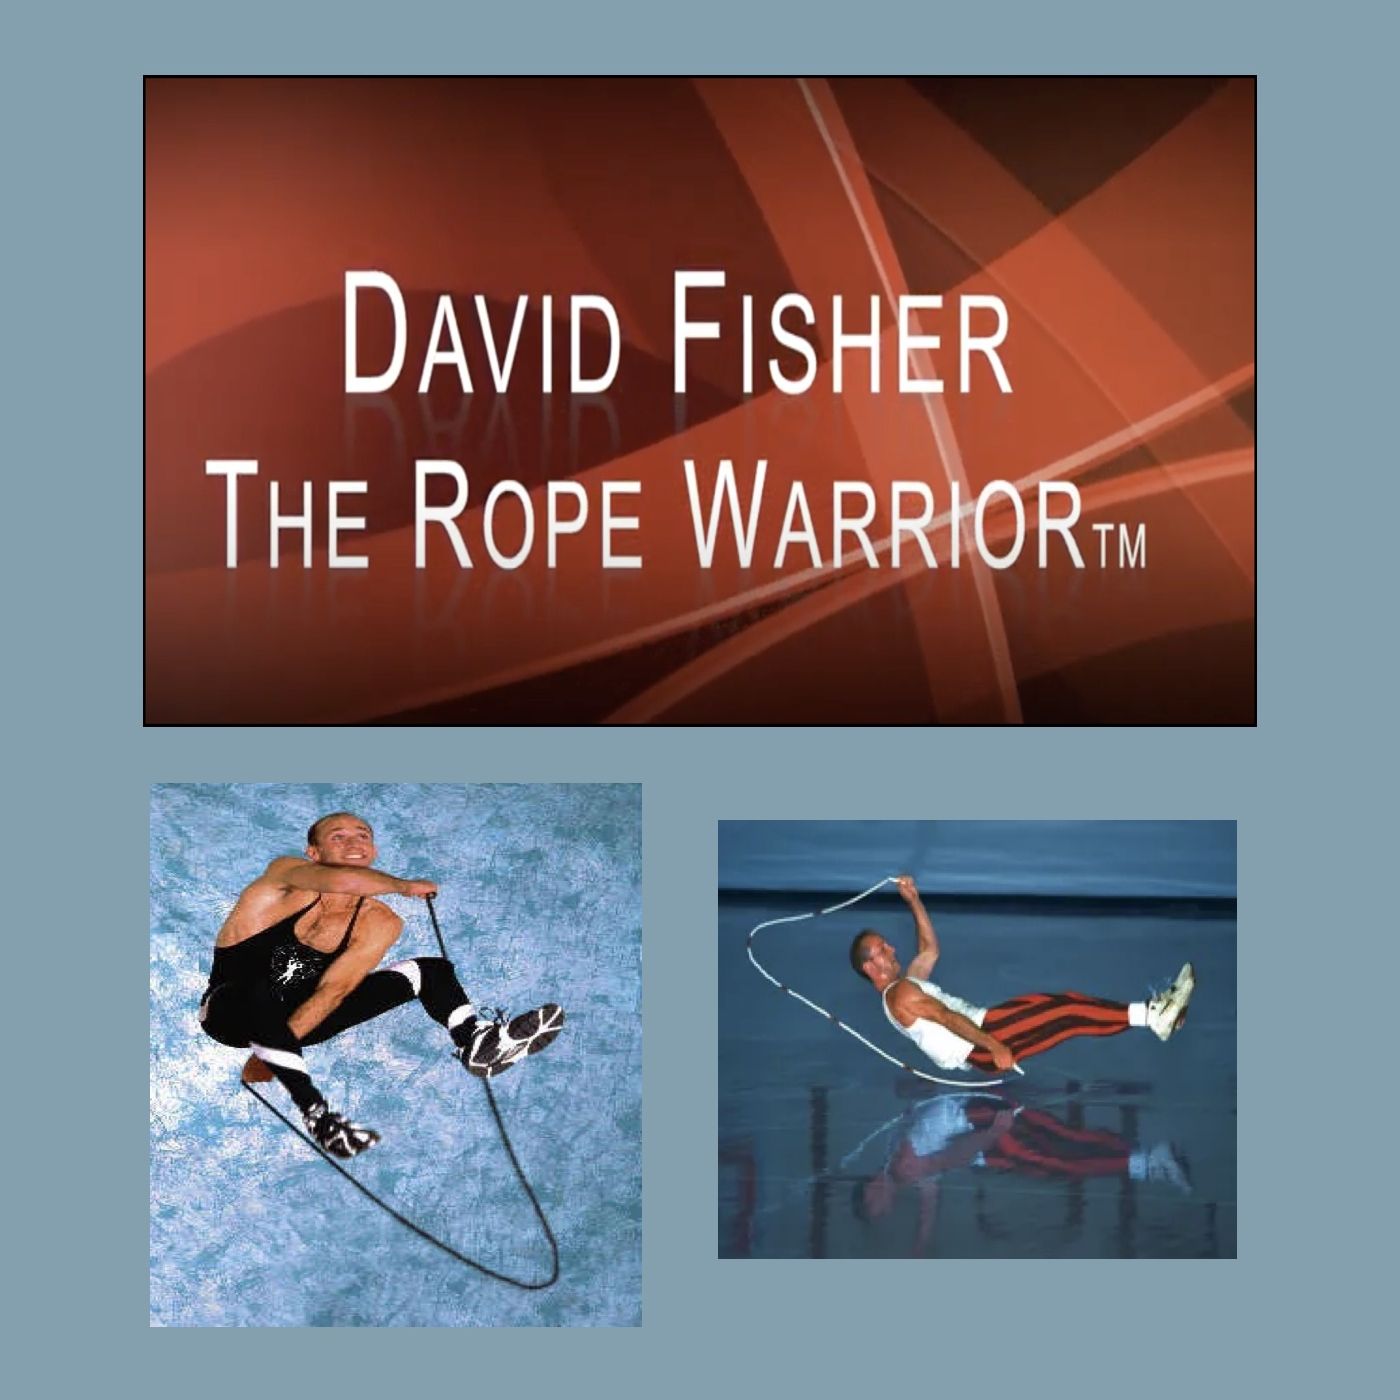 Rope Warrior David Fisher interview by CoolKay